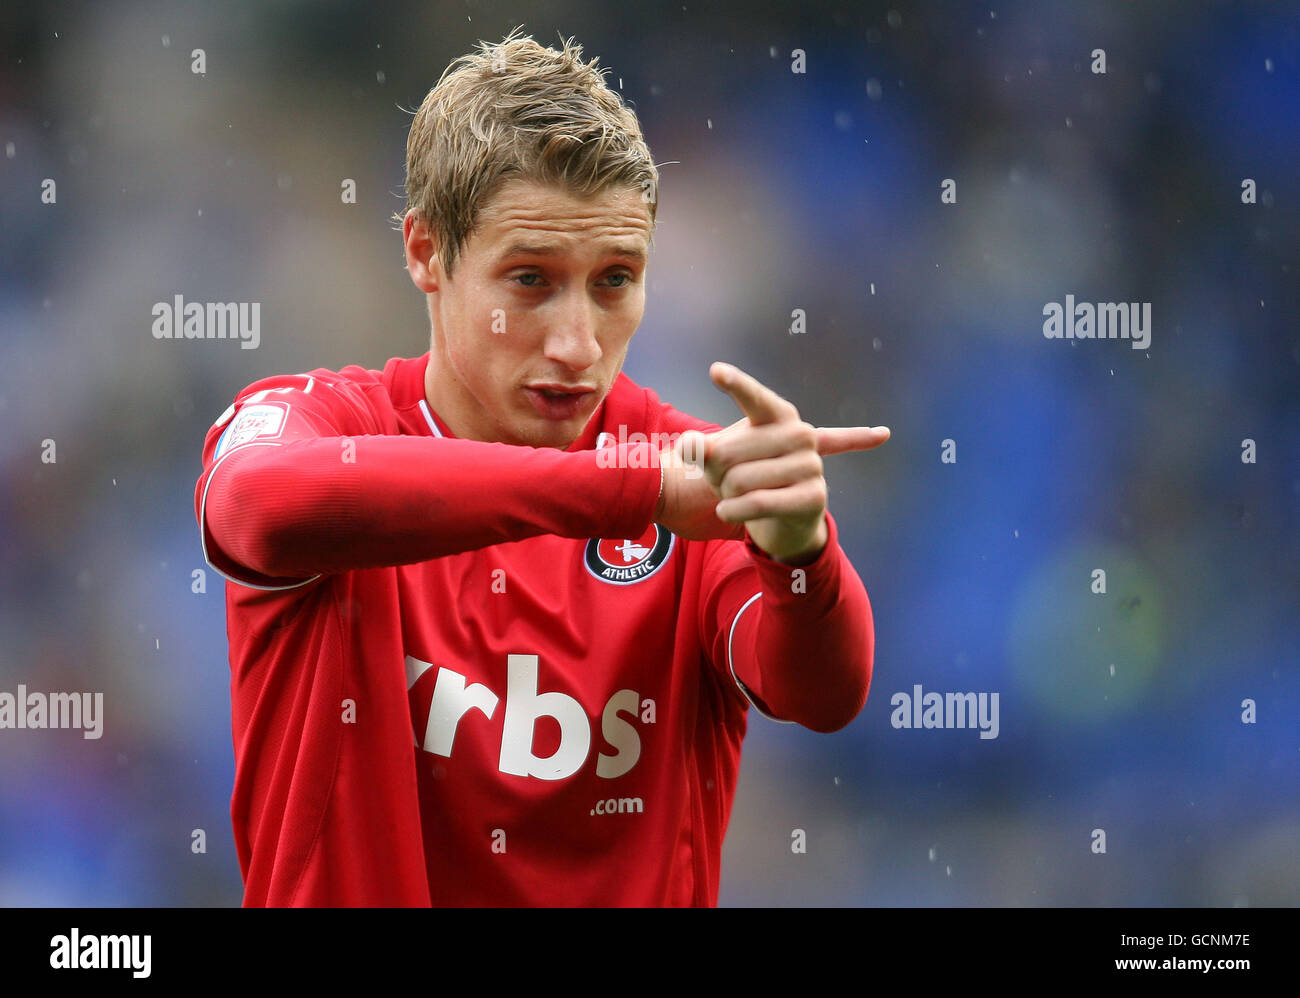 Football - npower football League One - Tranmere Rovers / Charlton Athletic - Prenton Park.Lee Martin de Charlton Athletic pendant le match contre Tranmere Rovers Banque D'Images